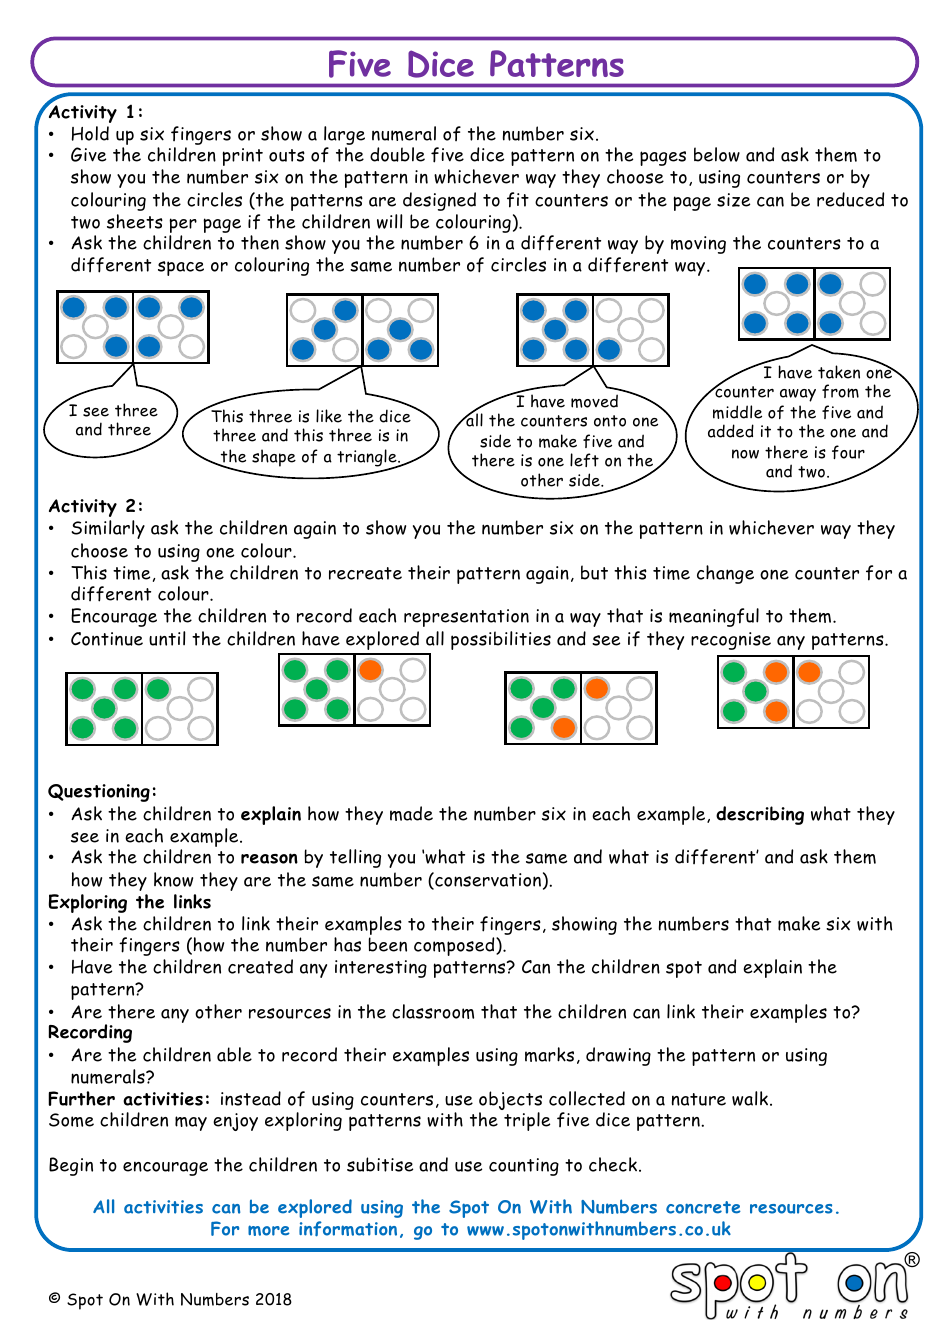 Five dice pattern templates - blank editable layout for dice patterns